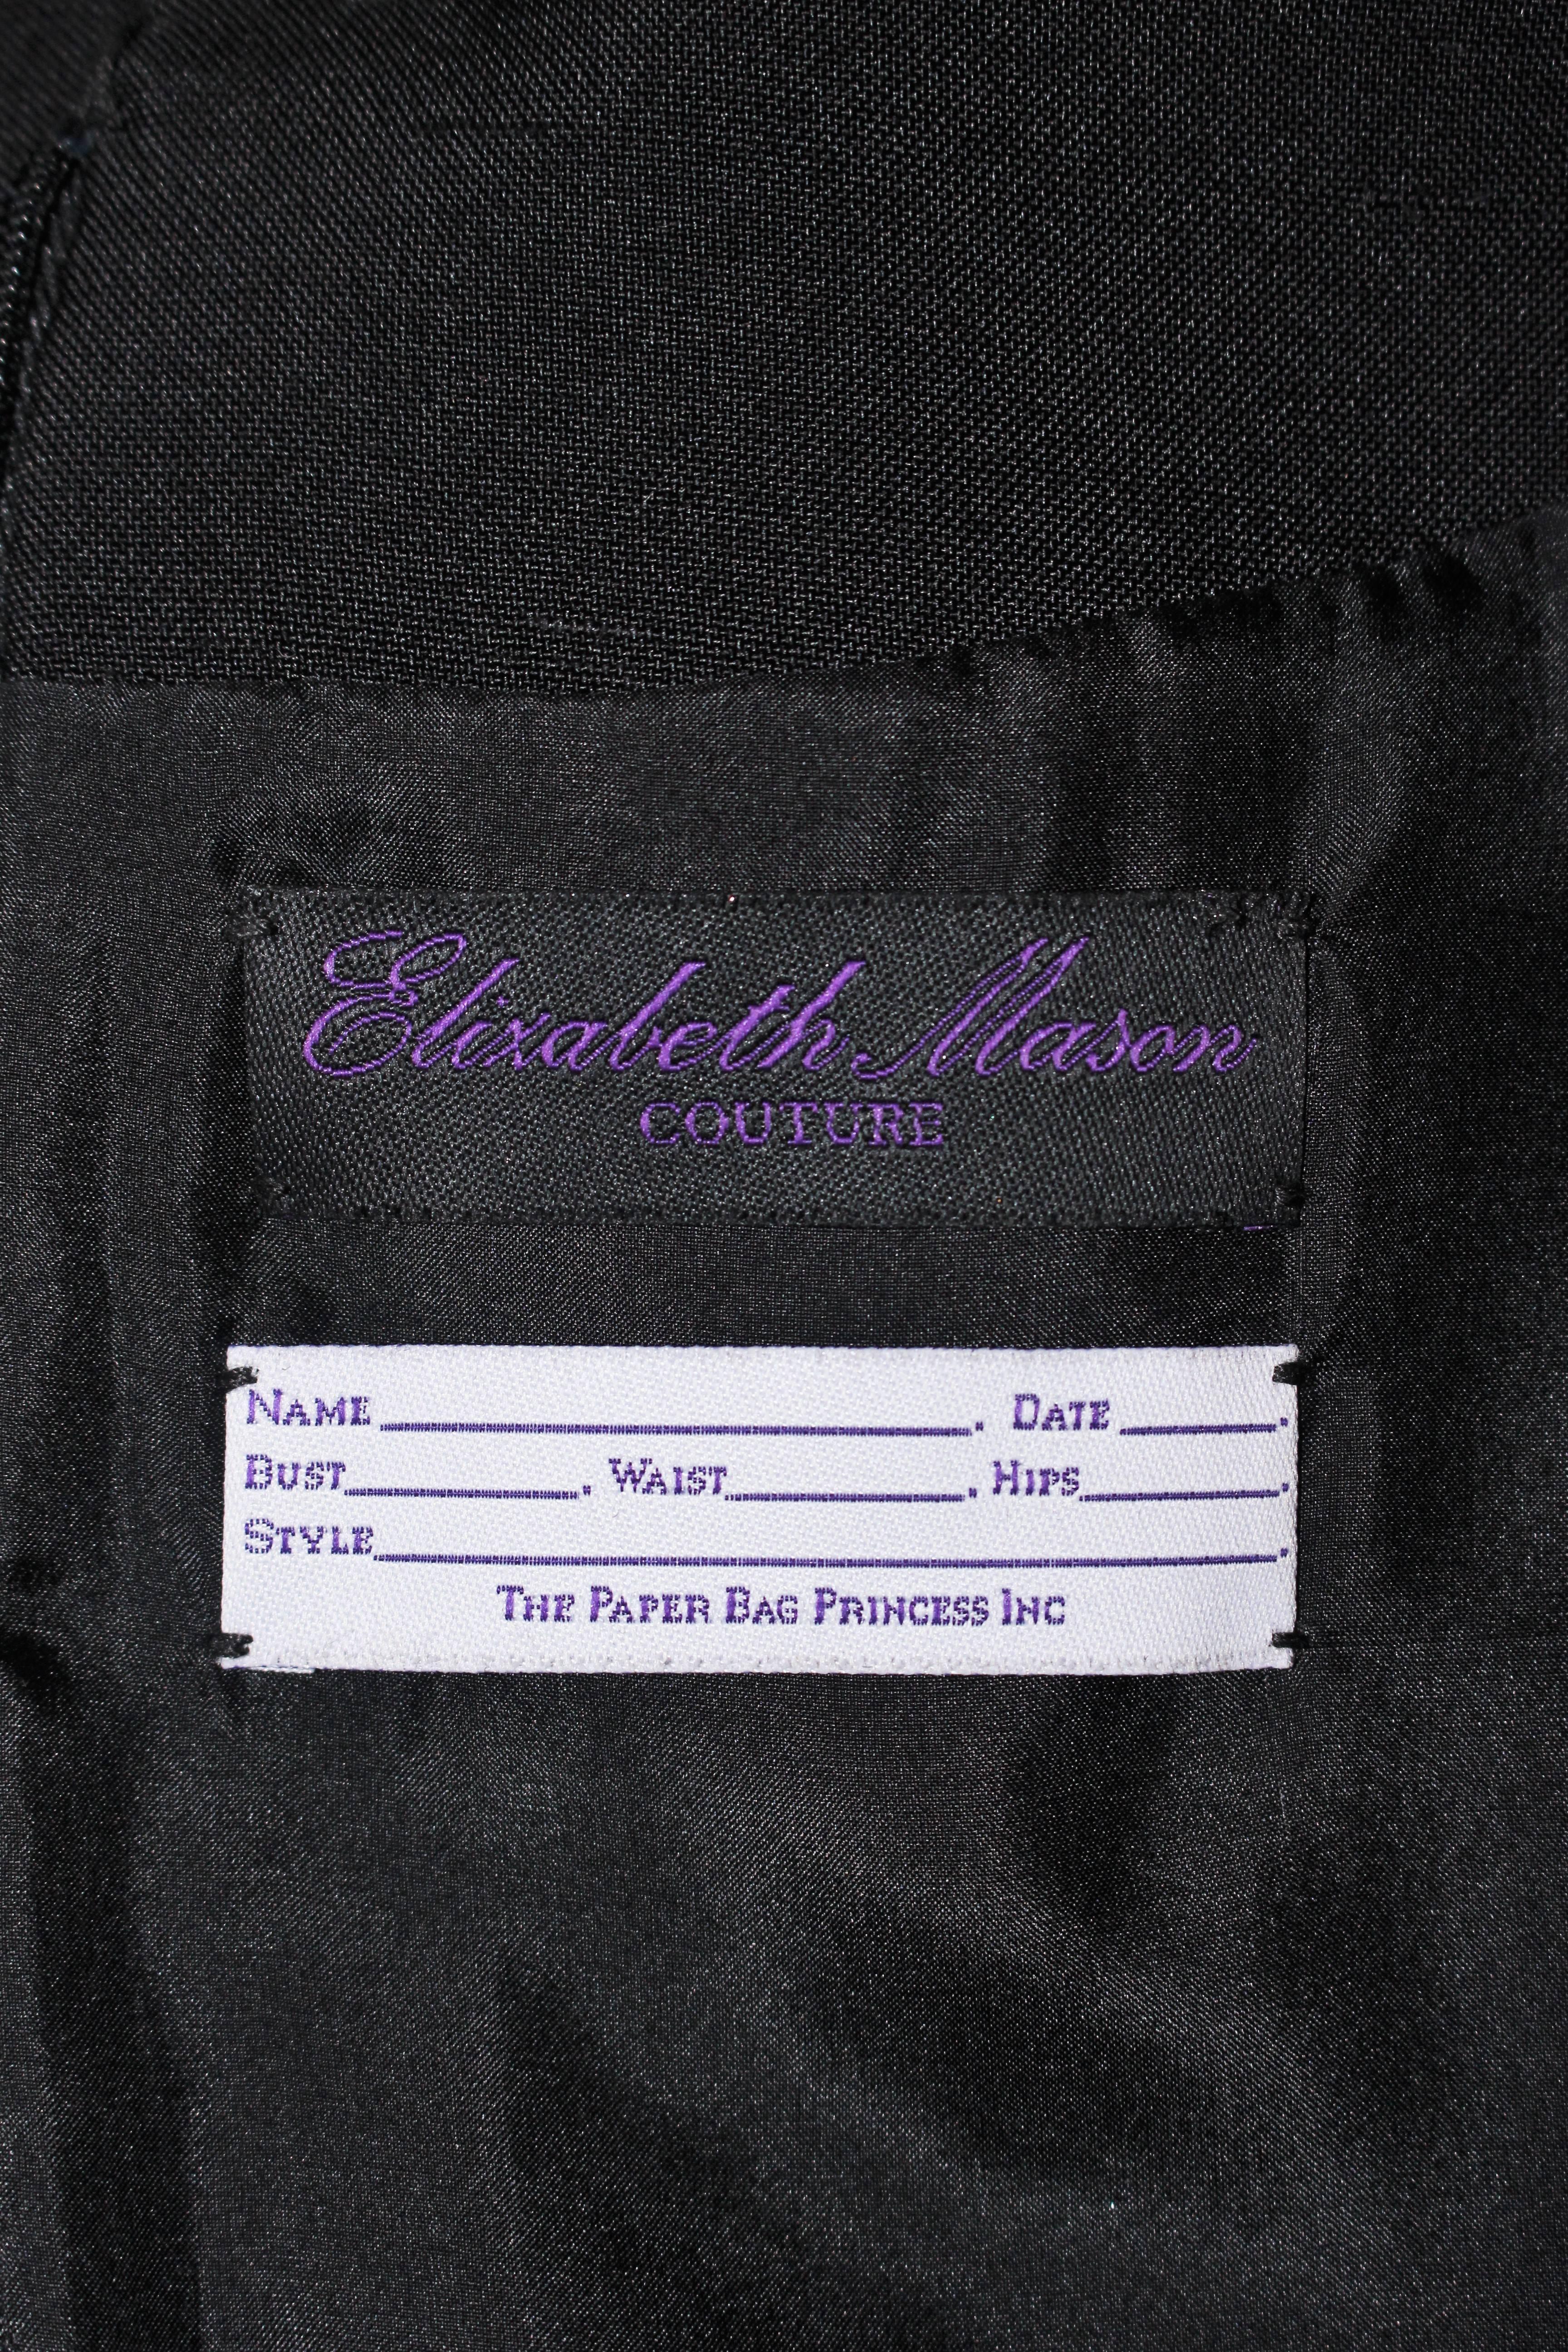 ELIZABETH MASON COUTURE Black Silk Cocktail Dress Made to Order For Sale 6